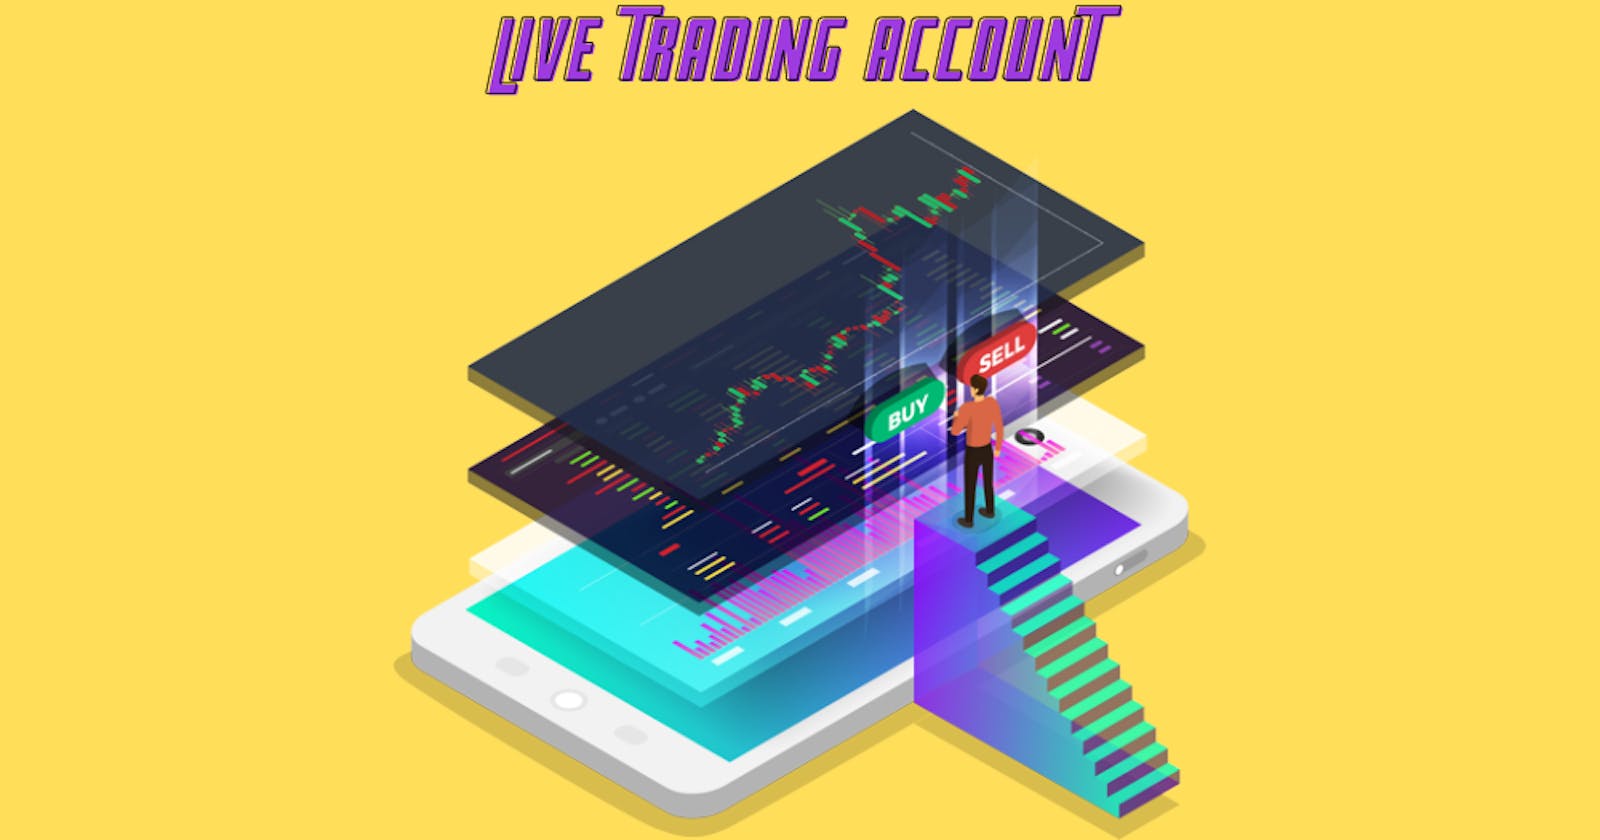 Live Trading Account in forex trading